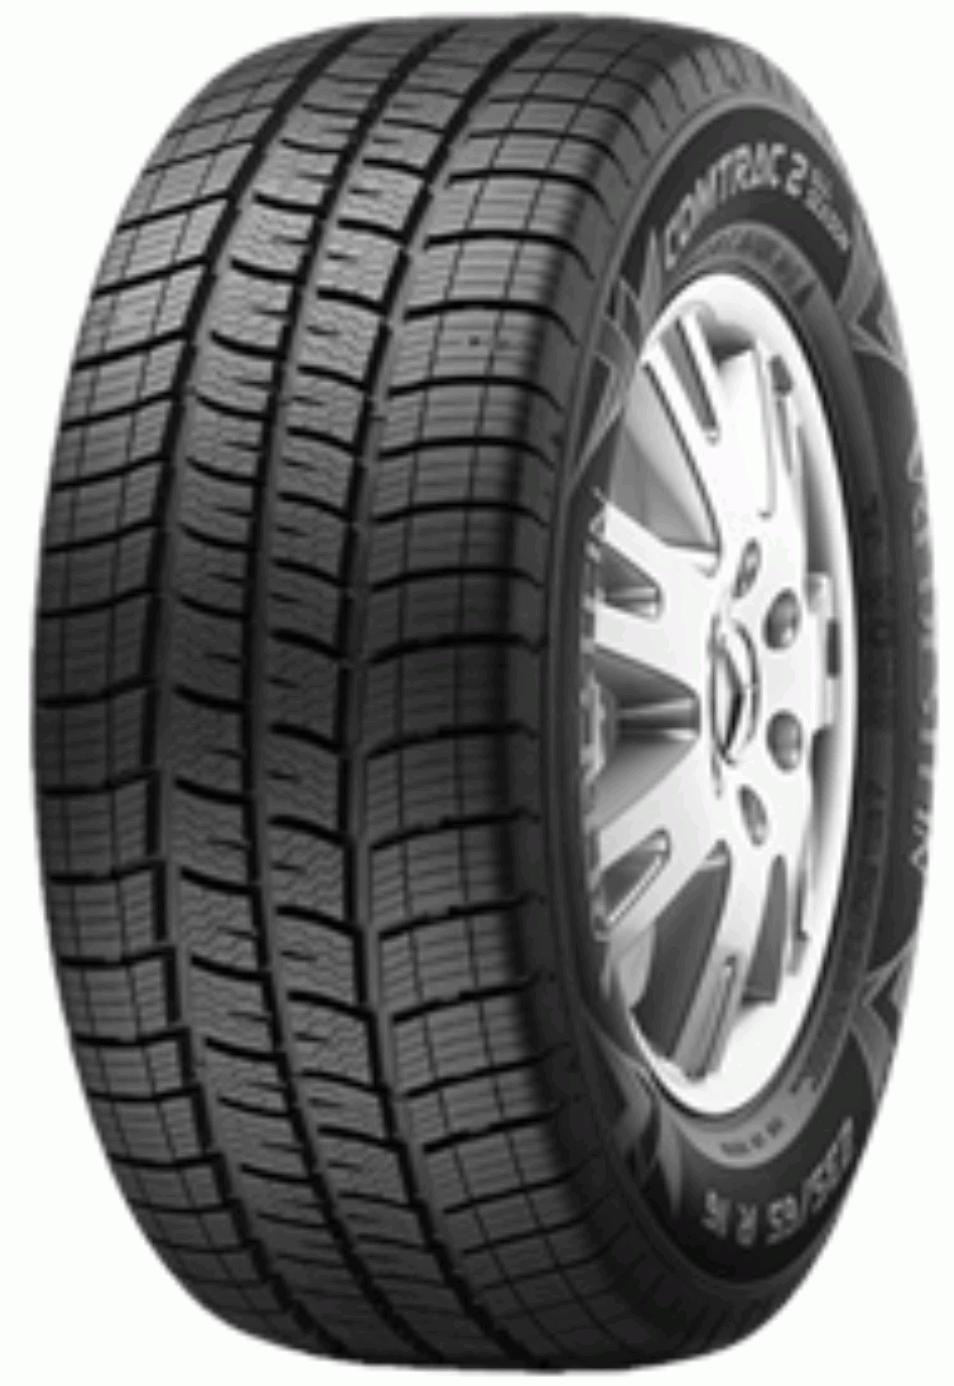 Tests Vredestein Comtrac and Reviews 2 Season All Tyre -